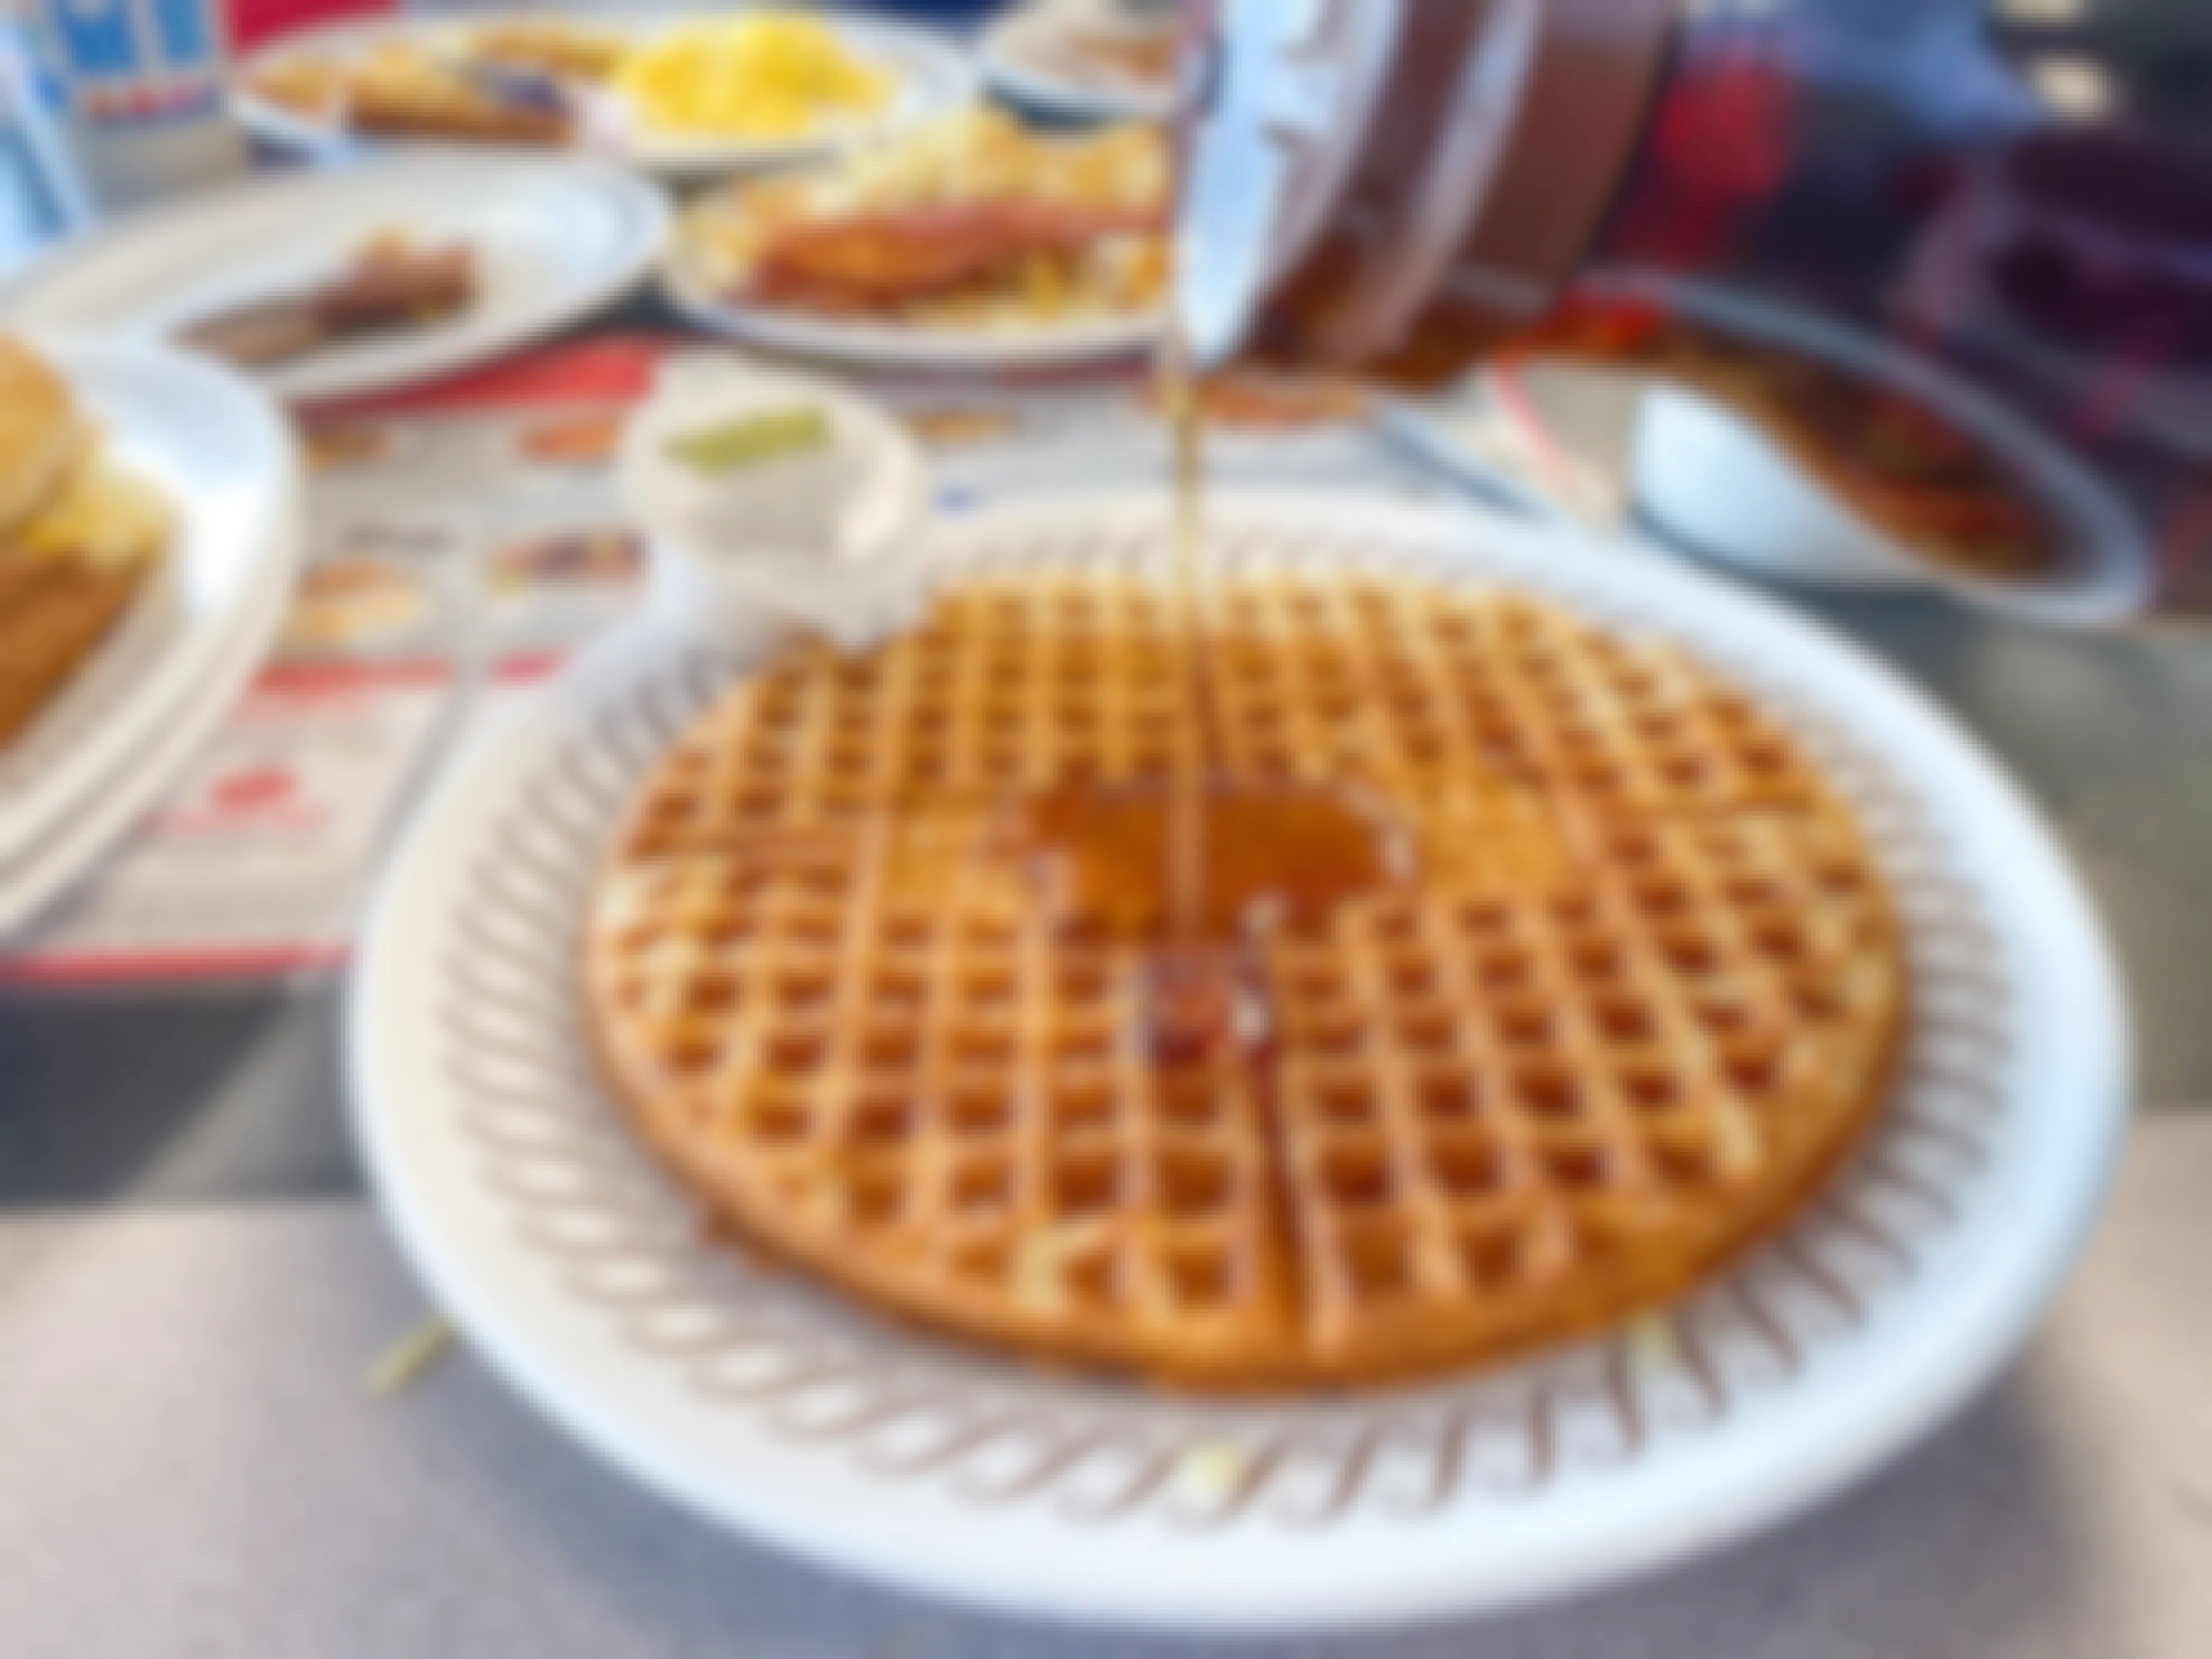 Someone pouring syrup onto a plated waffle on a table at Waffle House.